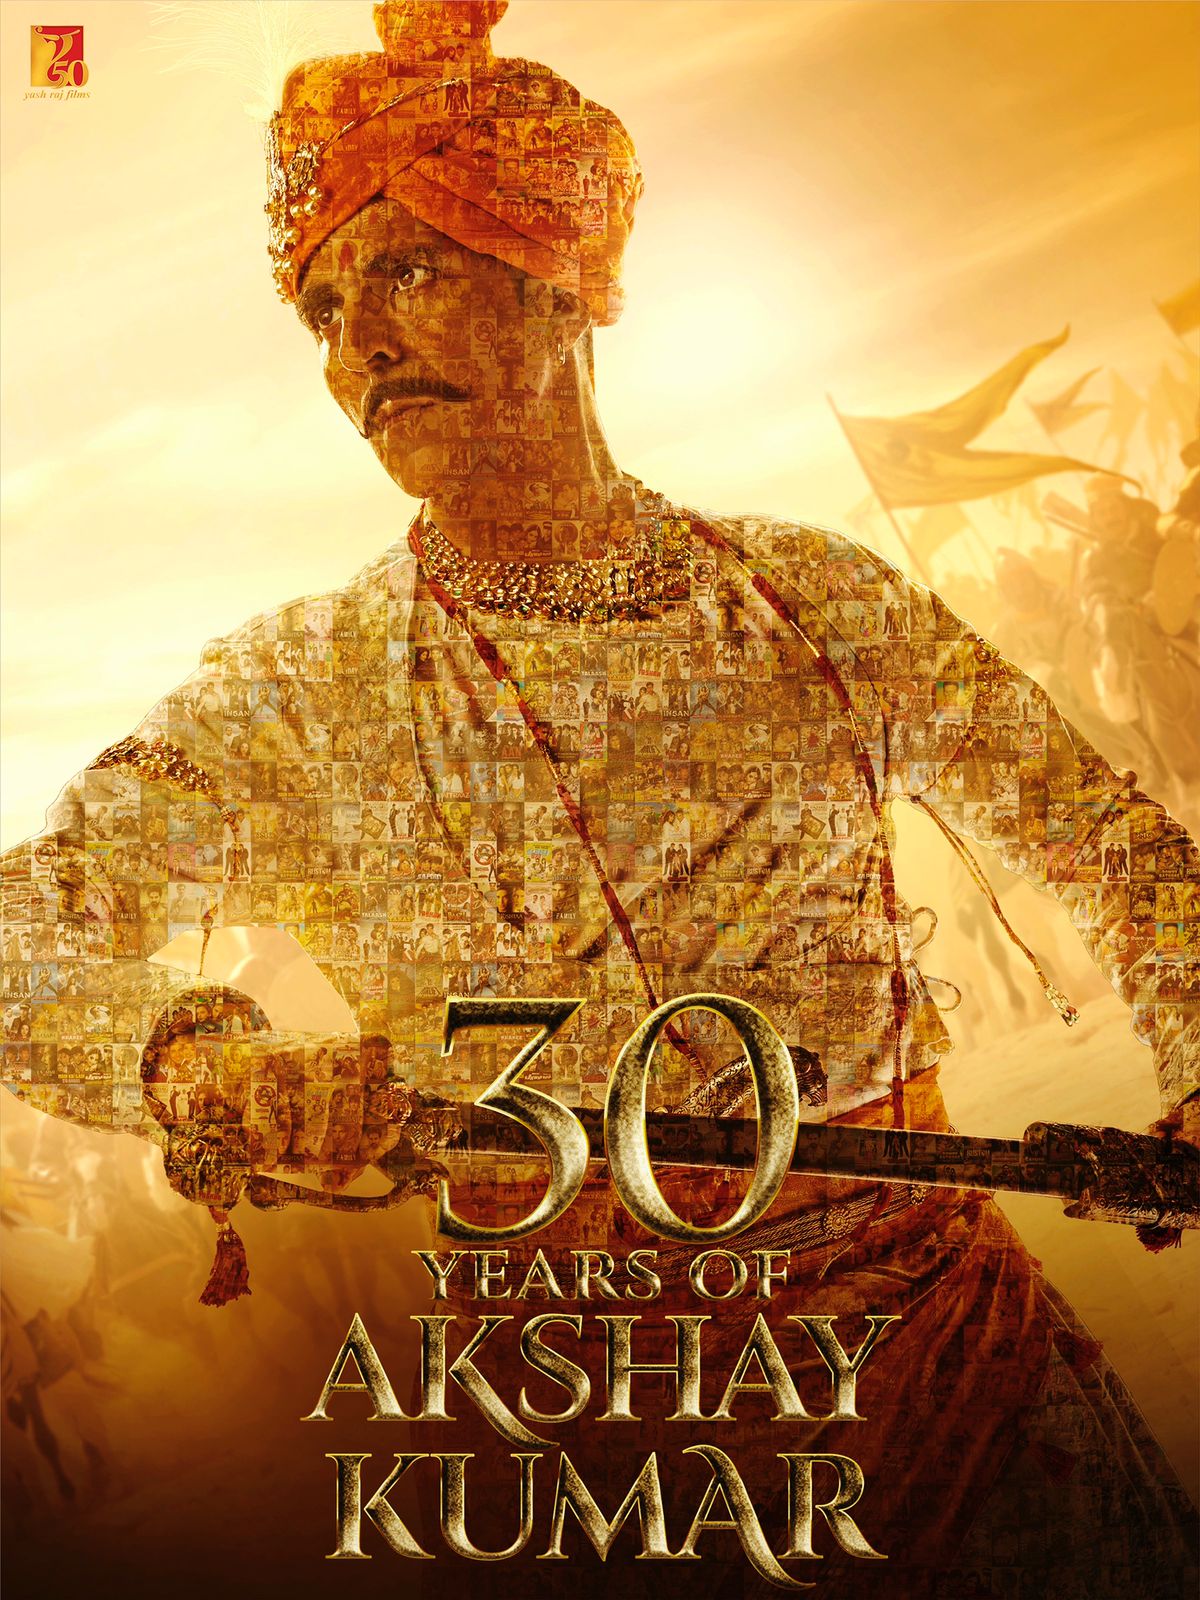 This is What Marked 3 Decades of Akshay Kumar in the Industry